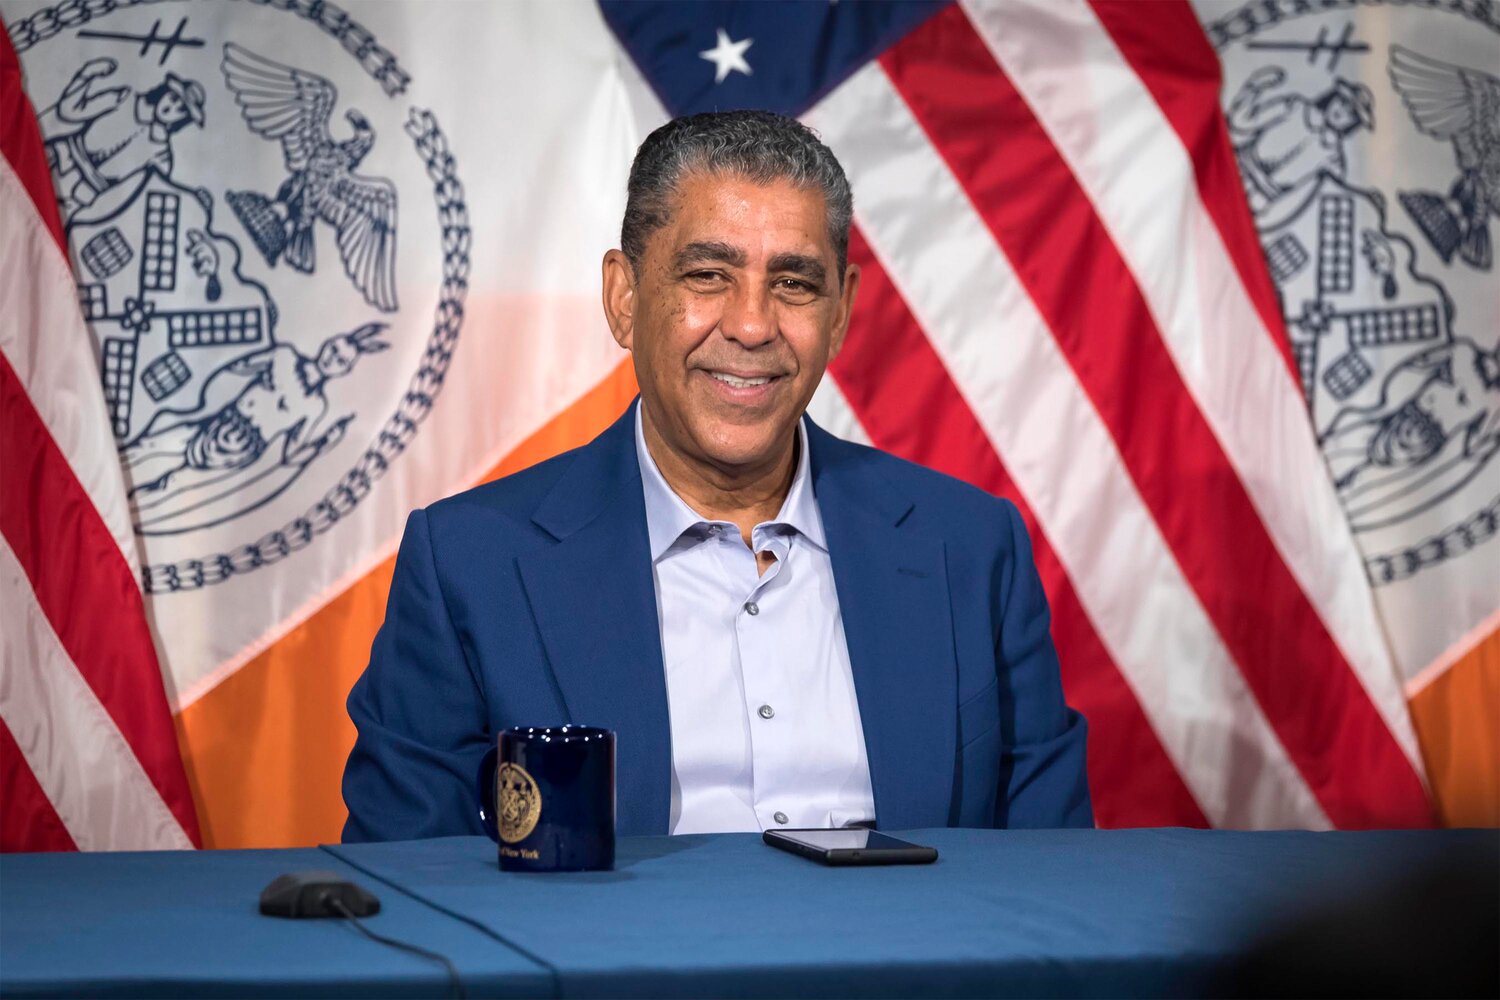 Congressman Adriano Espaillat, shown at a press conference at City Hall on July 8, 2021, is one of three Bronx lawmakers supporting for more NYCHA rental assistance funds in the state budgets.